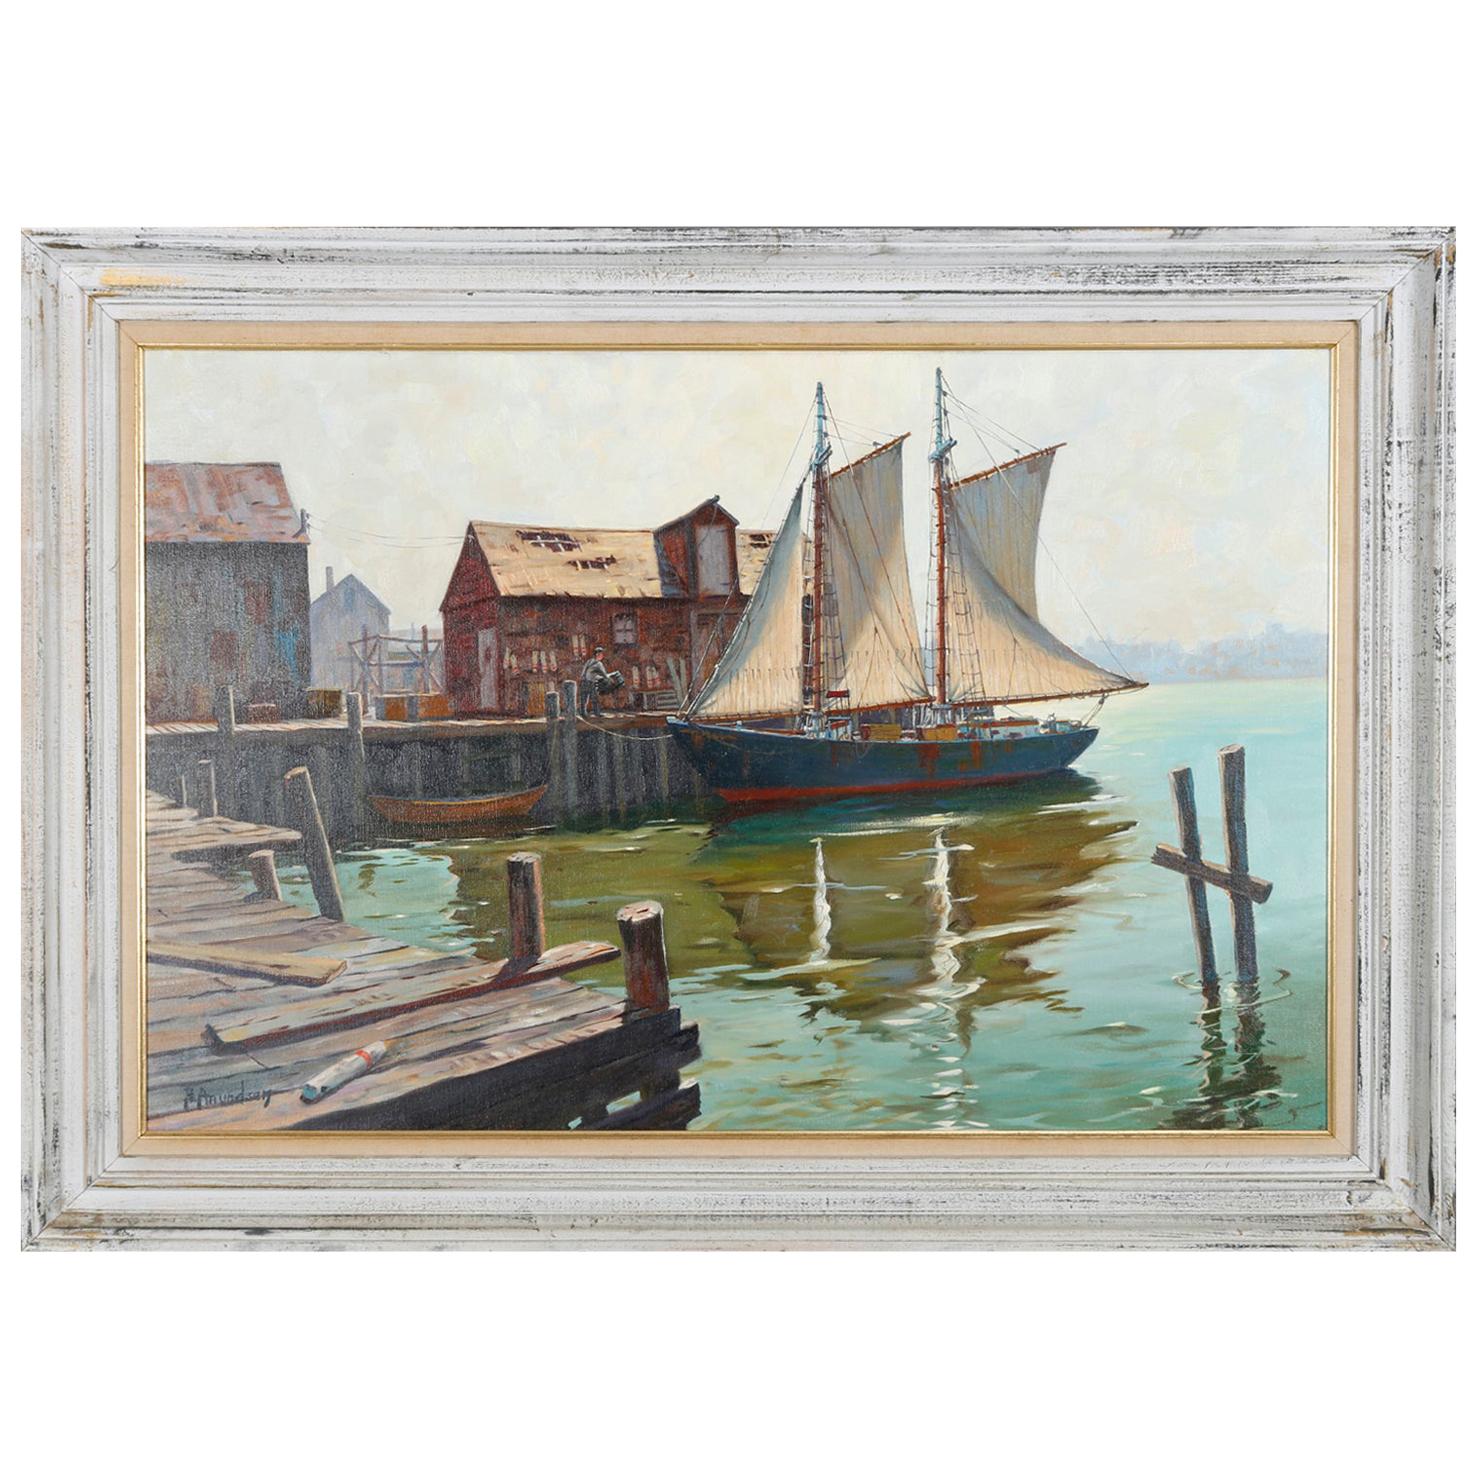 Oil on Canvas Seascape with Boats of Sag Harbor, NY, Artist Signed, circa 1973